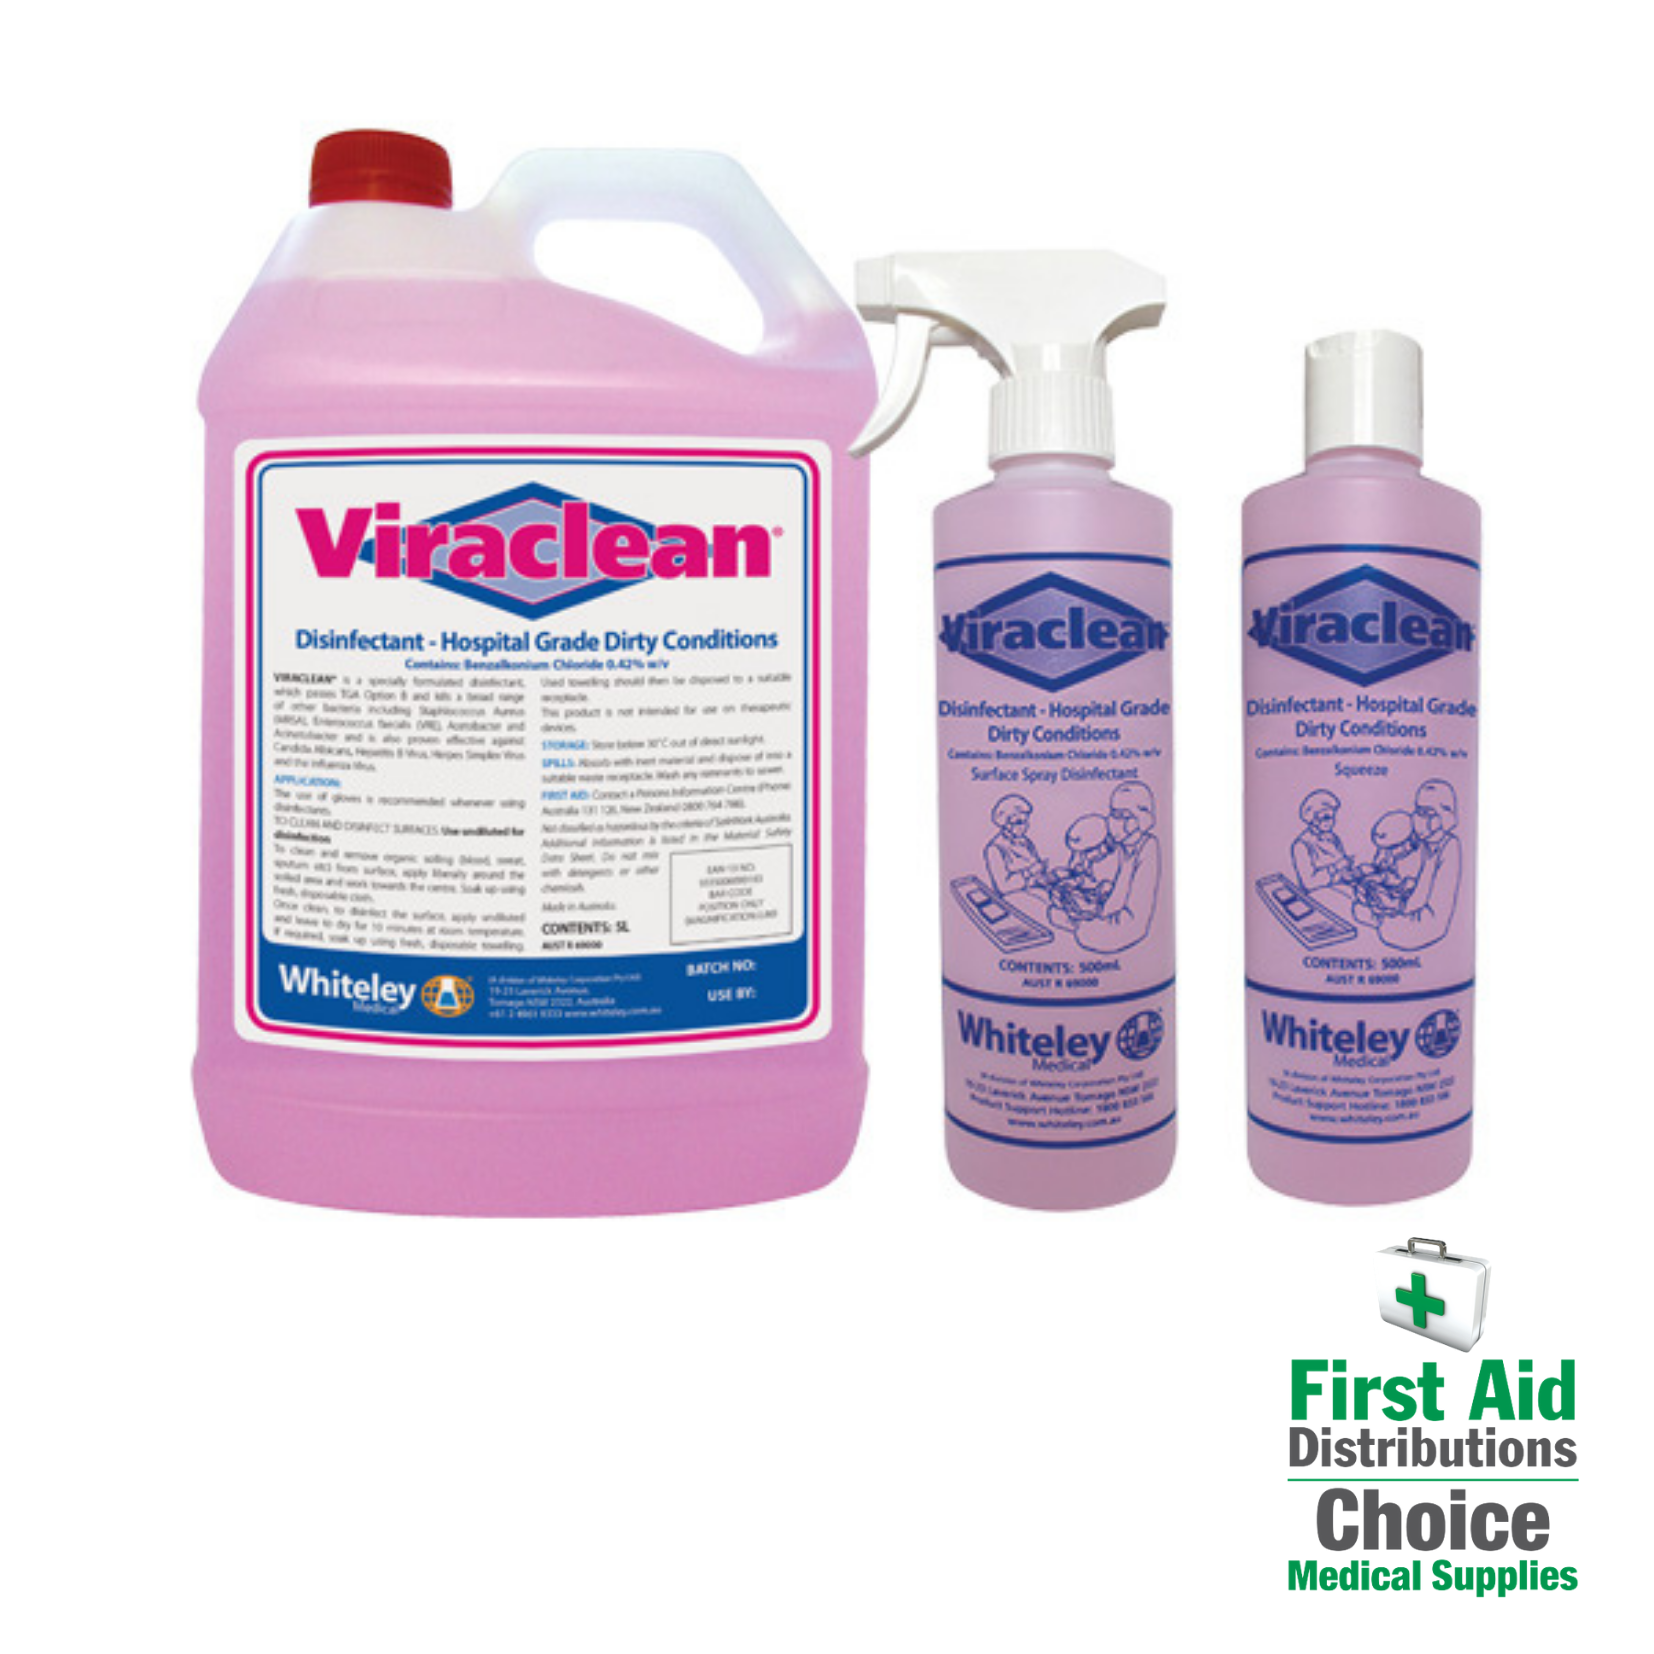 collections/Viraclean_First_Aid_Distributions.png